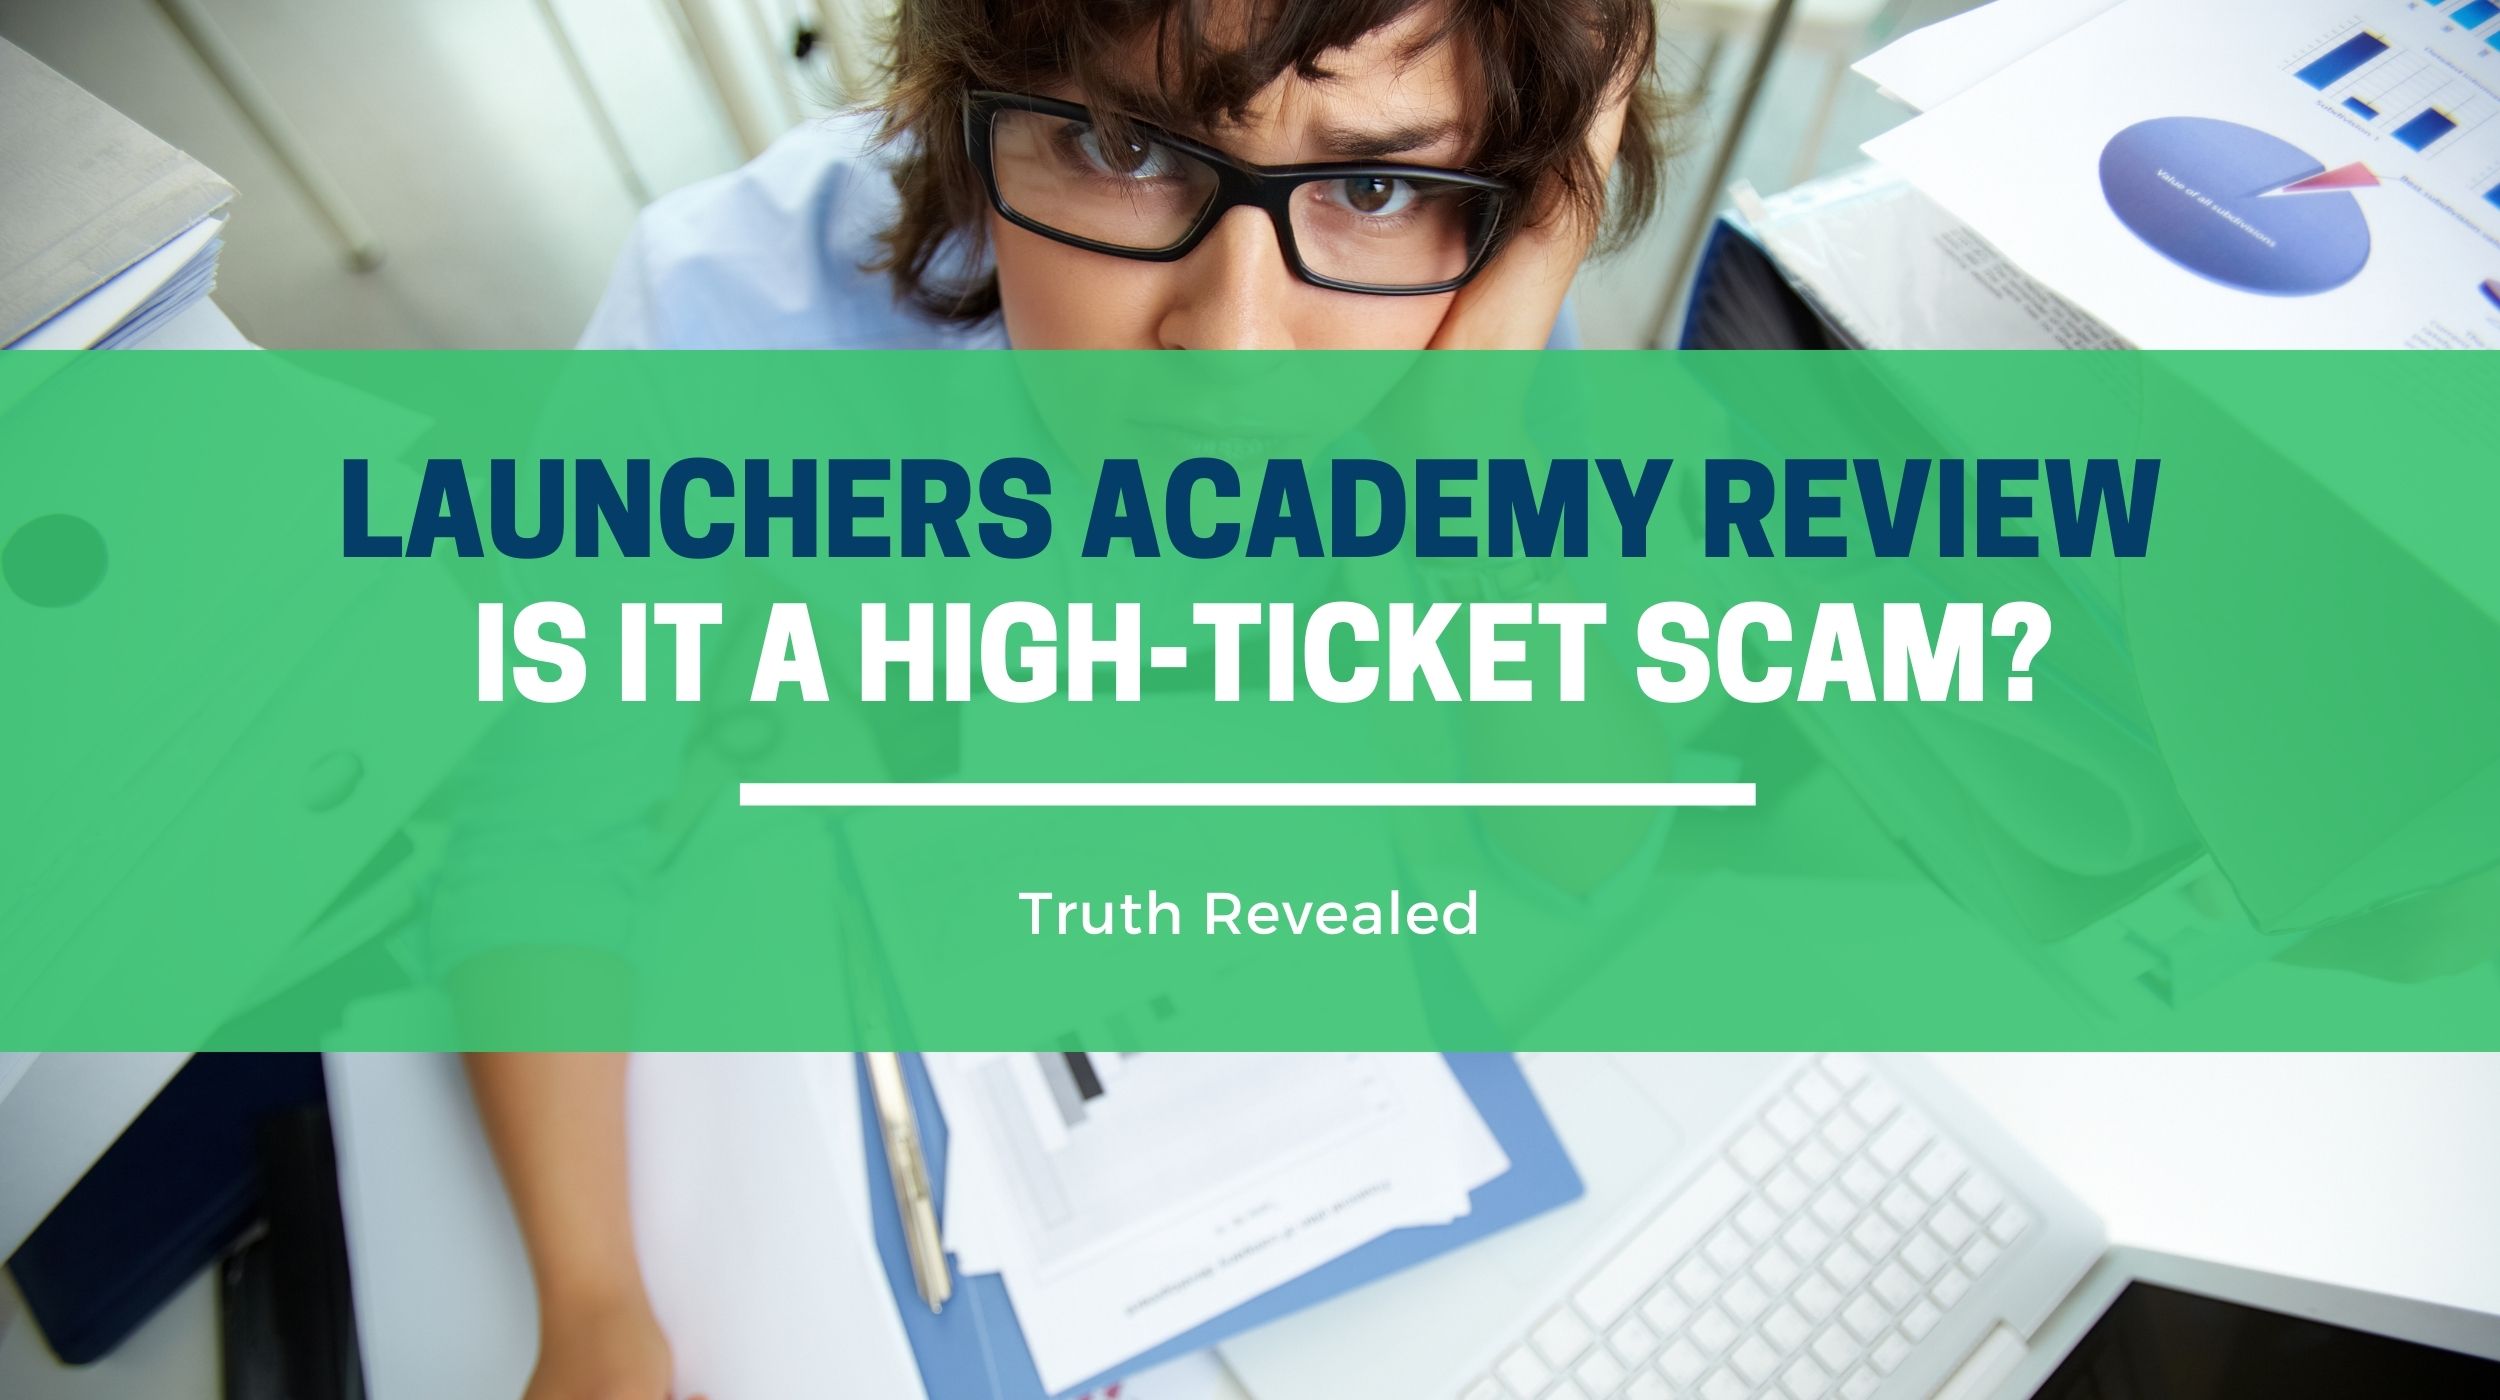 Launchers Academy Review